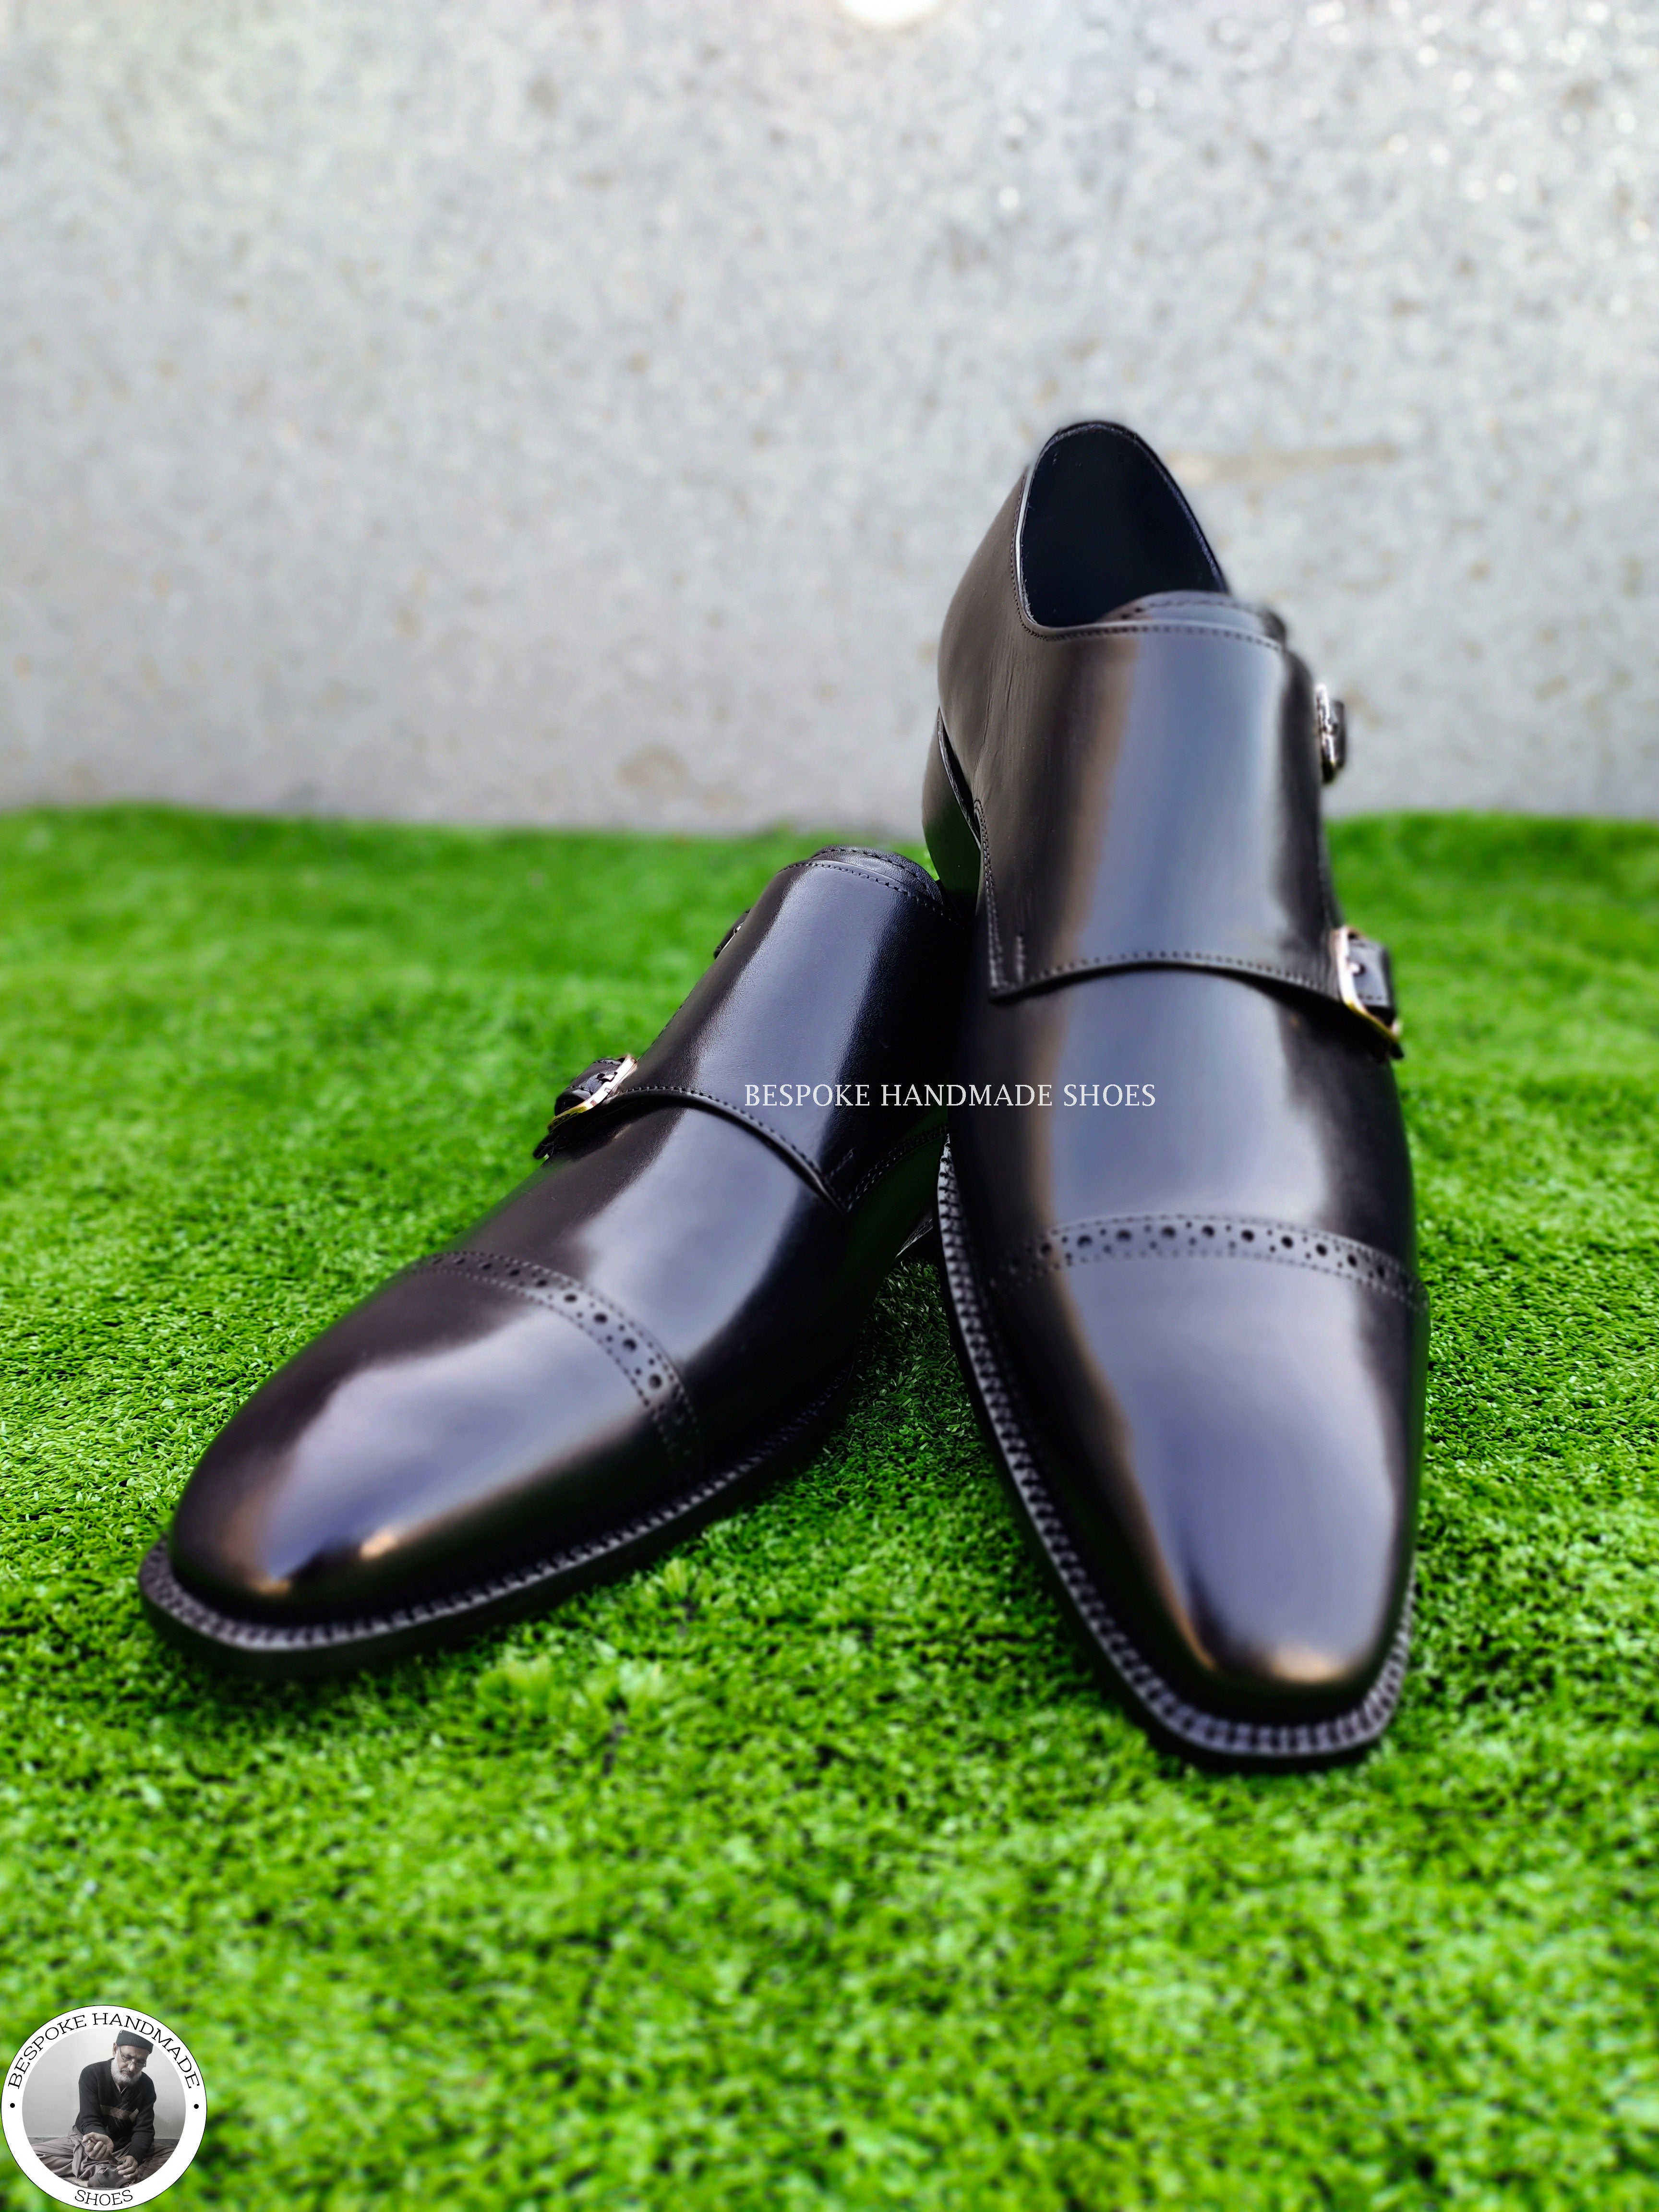 Buy Goodyear Welted Black Leather Shoes, Double Monk Strap Toe Cap Fashion Shoe